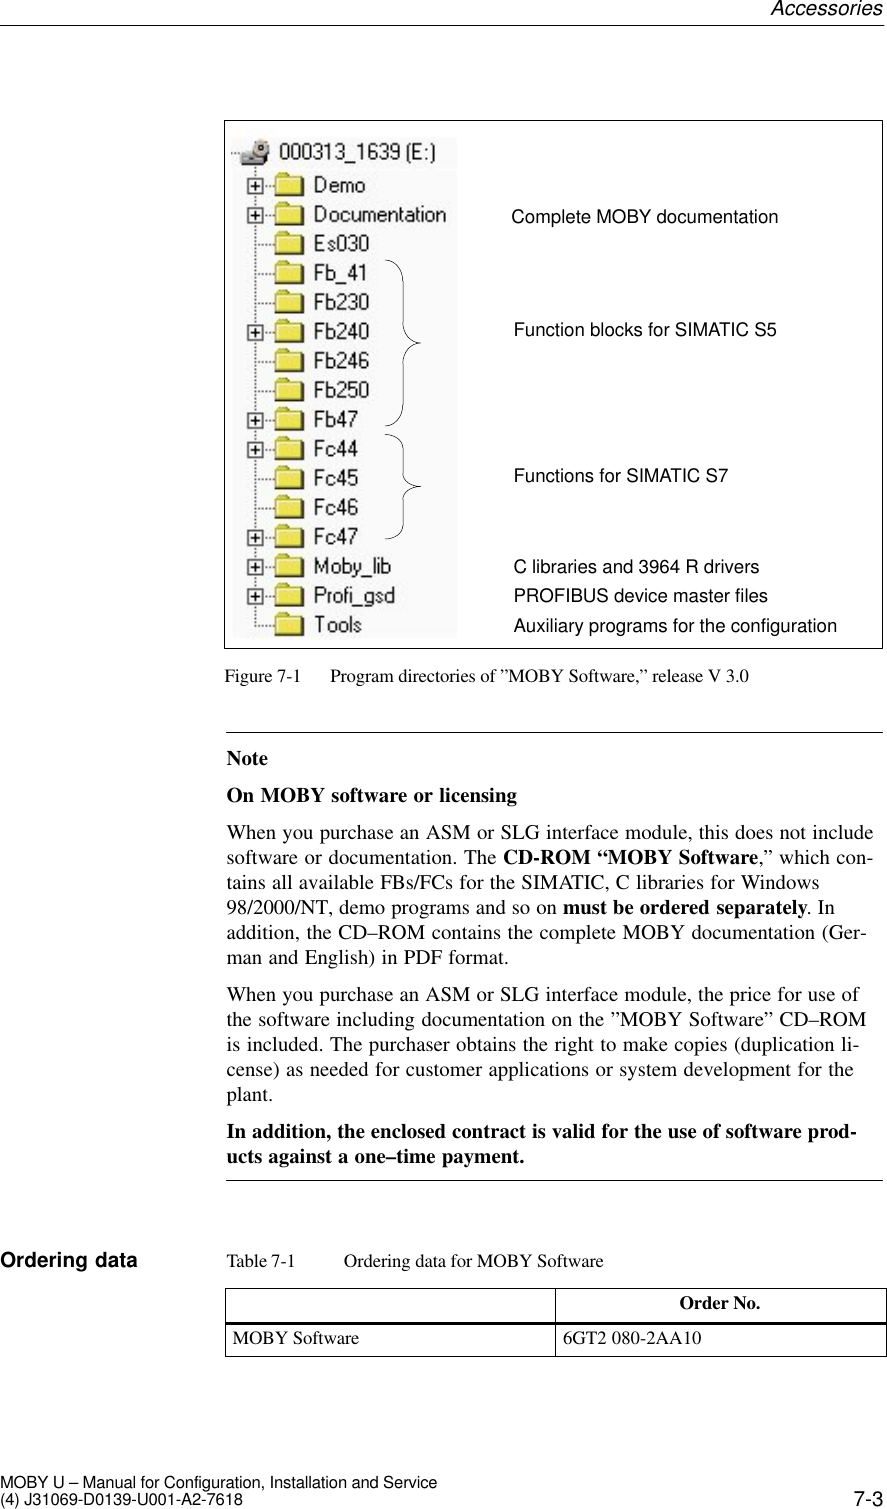 7-3MOBY U – Manual for Configuration, Installation and Service(4) J31069-D0139-U001-A2-7618C libraries and 3964 R driversComplete MOBY documentationFunction blocks for SIMATIC S5Functions for SIMATIC S7Auxiliary programs for the configurationPROFIBUS device master filesFigure 7-1 Program directories of ”MOBY Software,” release V 3.0NoteOn MOBY software or licensingWhen you purchase an ASM or SLG interface module, this does not includesoftware or documentation. The CD-ROM “MOBY Software,” which con-tains all available FBs/FCs for the SIMATIC, C libraries for Windows98/2000/NT, demo programs and so on must be ordered separately. Inaddition, the CD–ROM contains the complete MOBY documentation (Ger-man and English) in PDF format.When you purchase an ASM or SLG interface module, the price for use ofthe software including documentation on the ”MOBY Software” CD–ROMis included. The purchaser obtains the right to make copies (duplication li-cense) as needed for customer applications or system development for theplant.In addition, the enclosed contract is valid for the use of software prod-ucts against a one–time payment.Table 7-1 Ordering data for MOBY SoftwareOrder No.MOBY Software 6GT2 080-2AA10Ordering dataAccessories